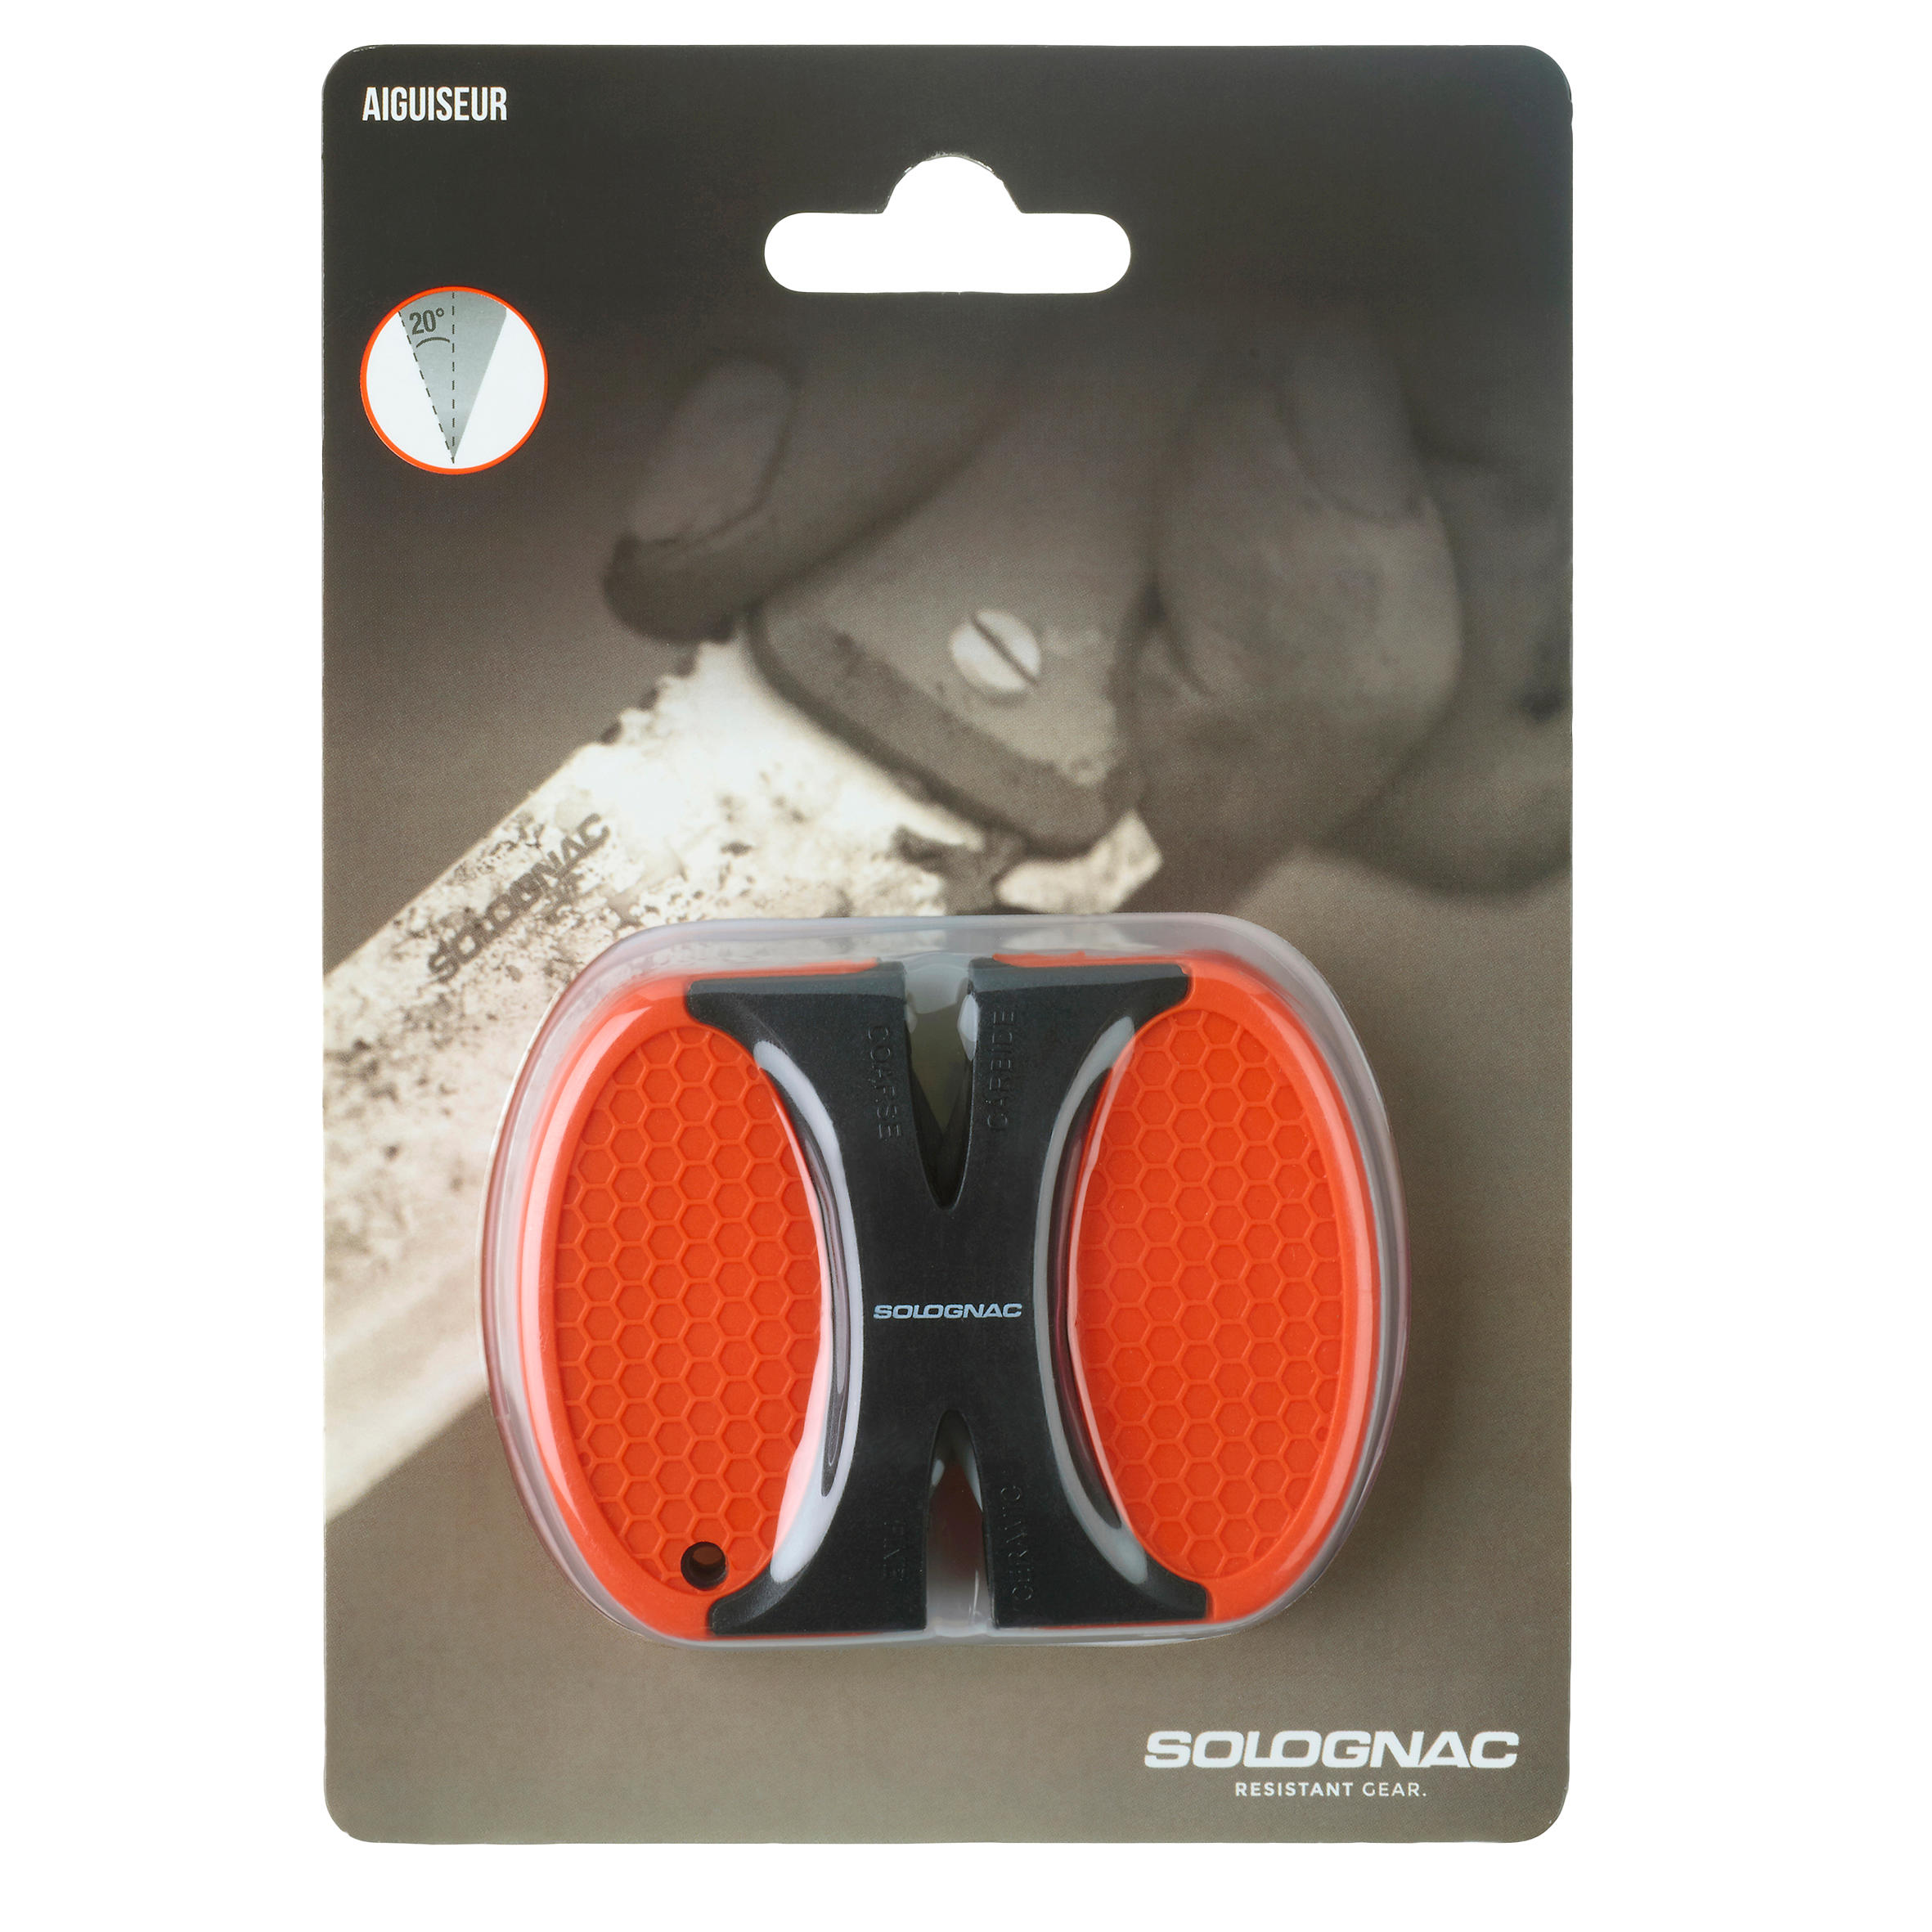 Double-Sided Quick Sharpener - SOLOGNAC